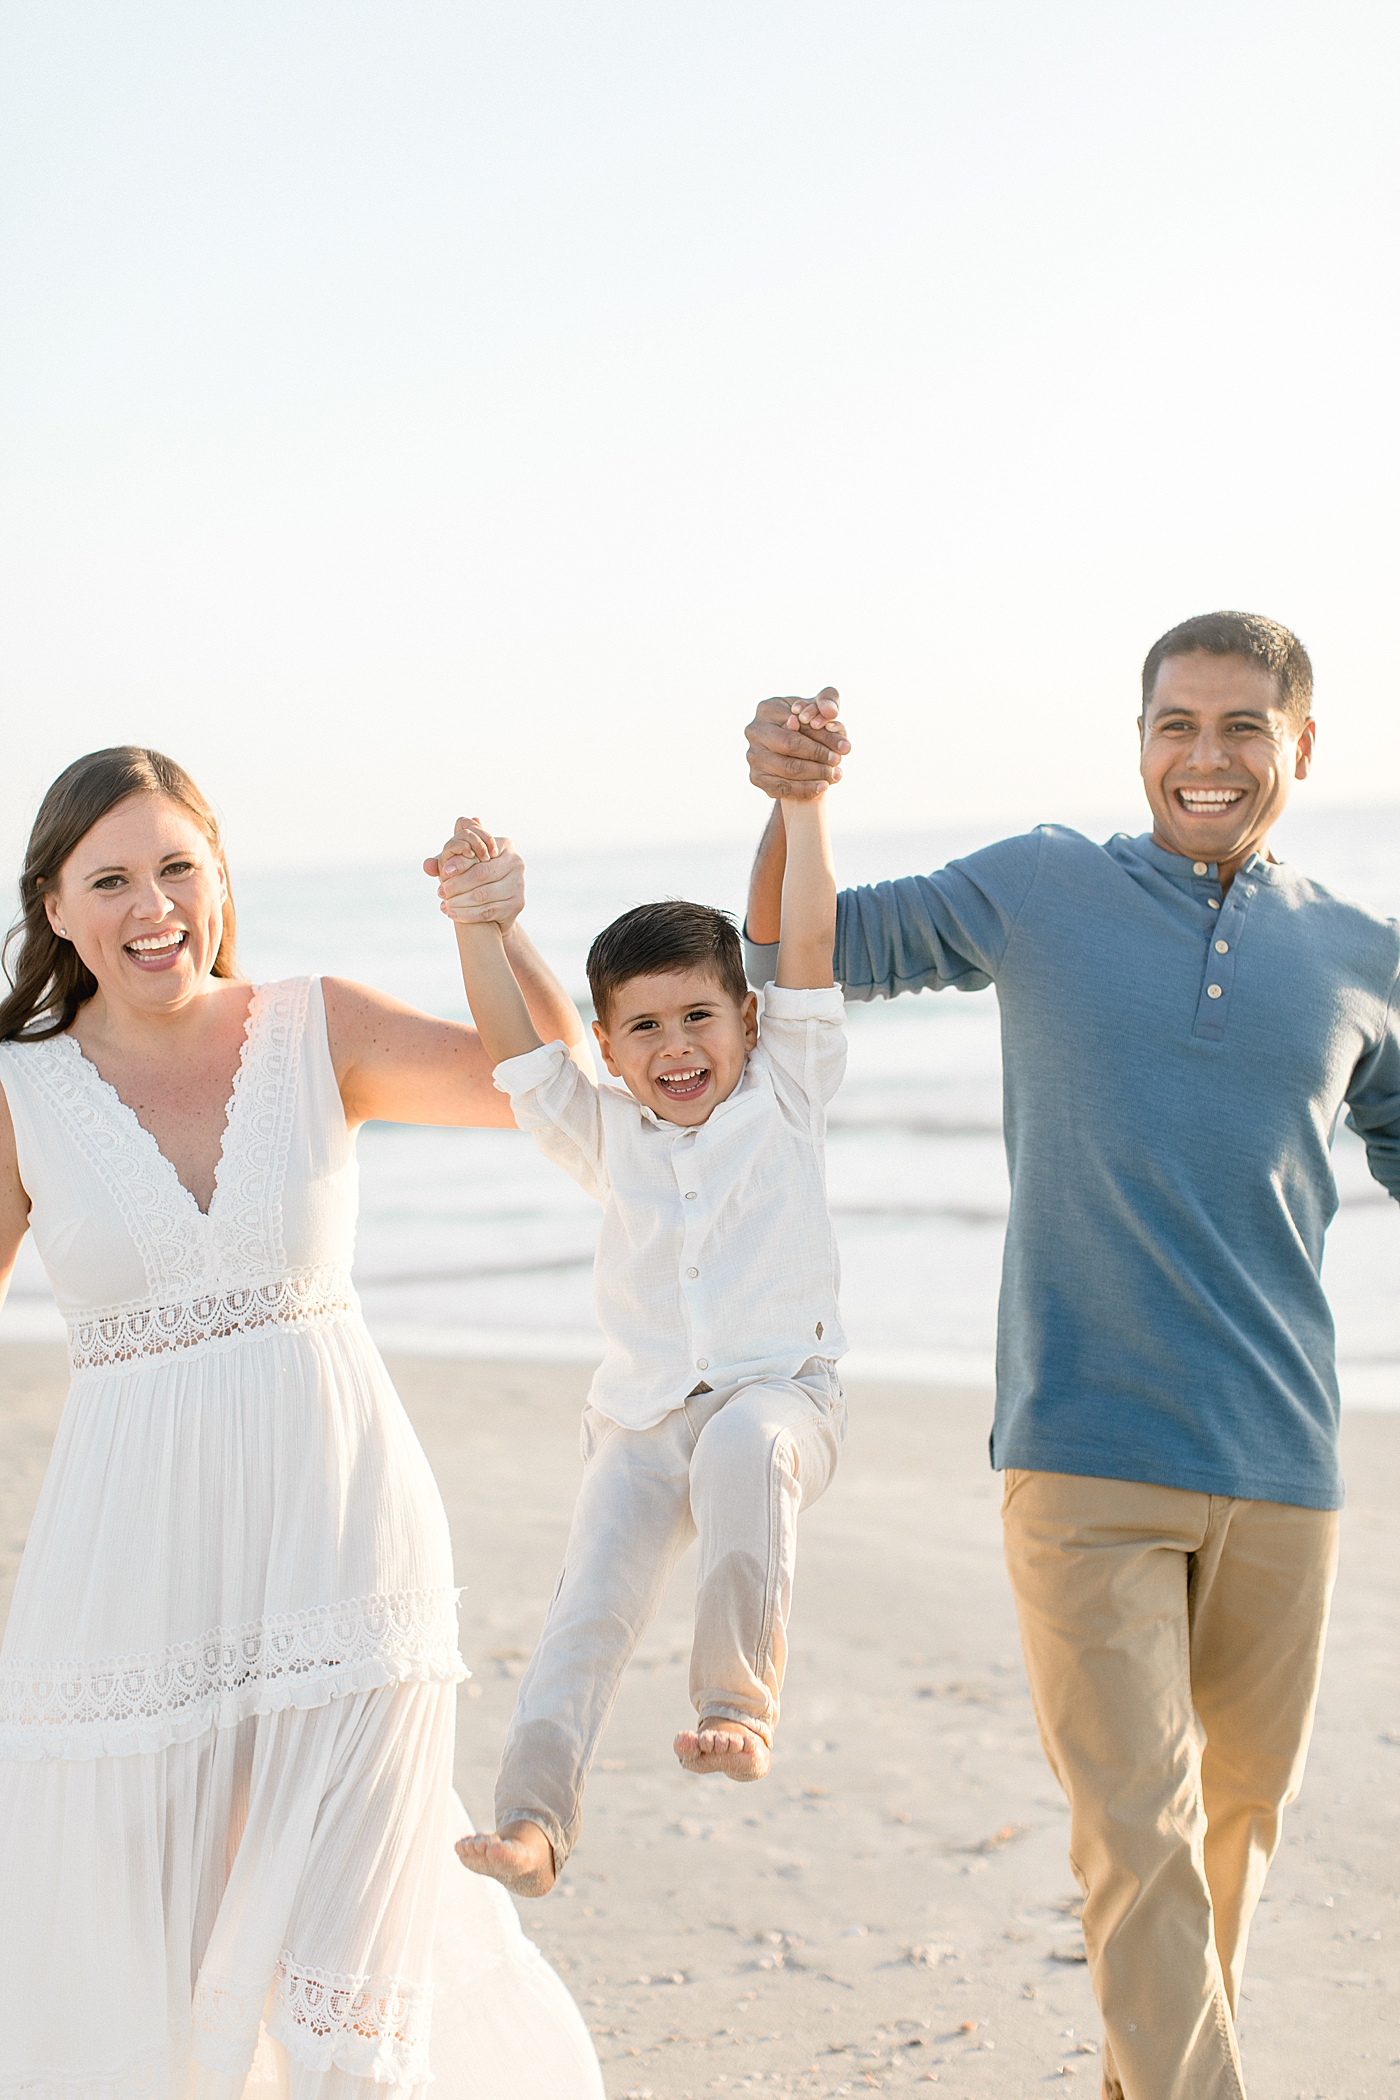 Mom and Dad swinging their son on the beach. Everyone has big smiles on their face. Photos by Brittany Elise Photography.